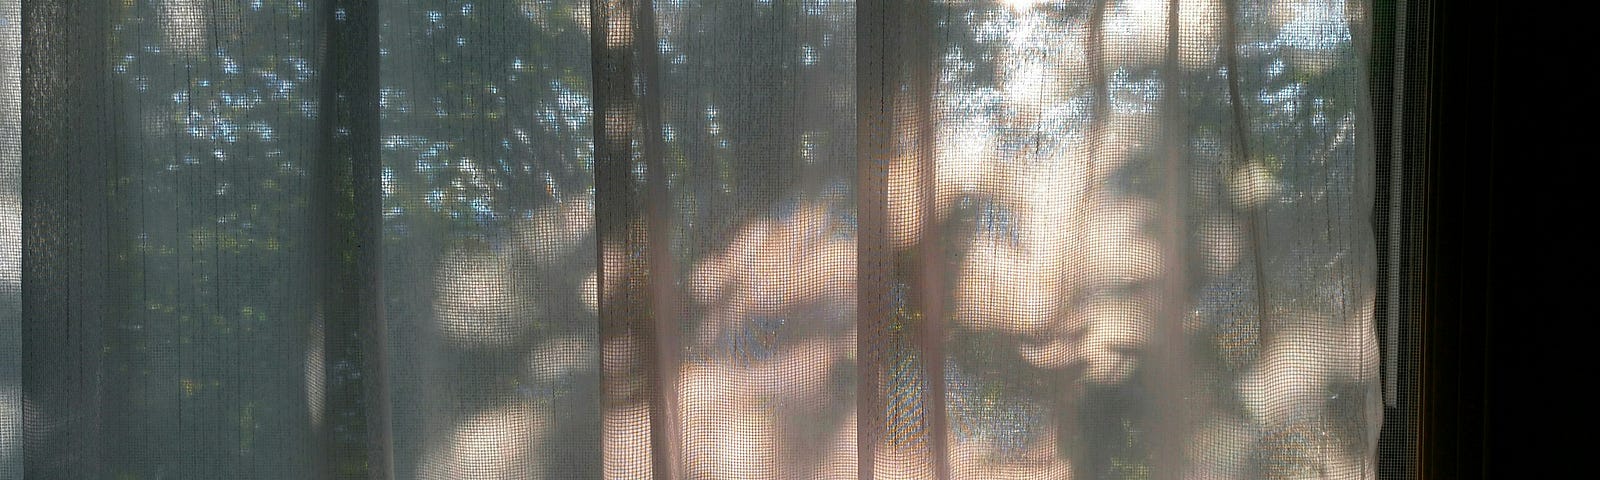 Sheer delicate light pinkish curtains with sun and shadows of trees peering in.